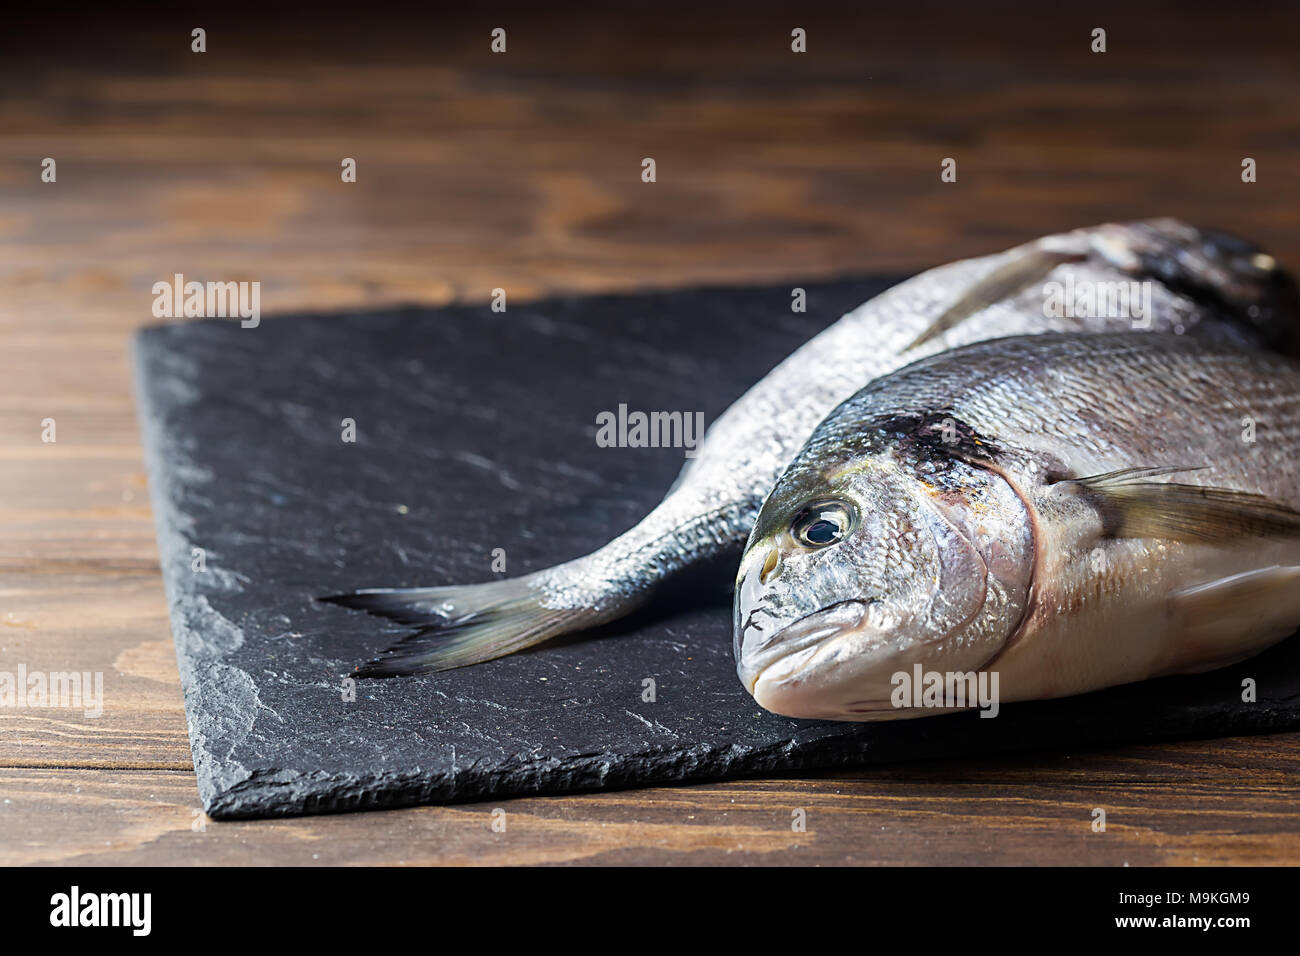 Fresh uncooked dorado or sea bream fish with lemon slices, spices and herbs. Mediterranean cuisine. Top view Stock Photo